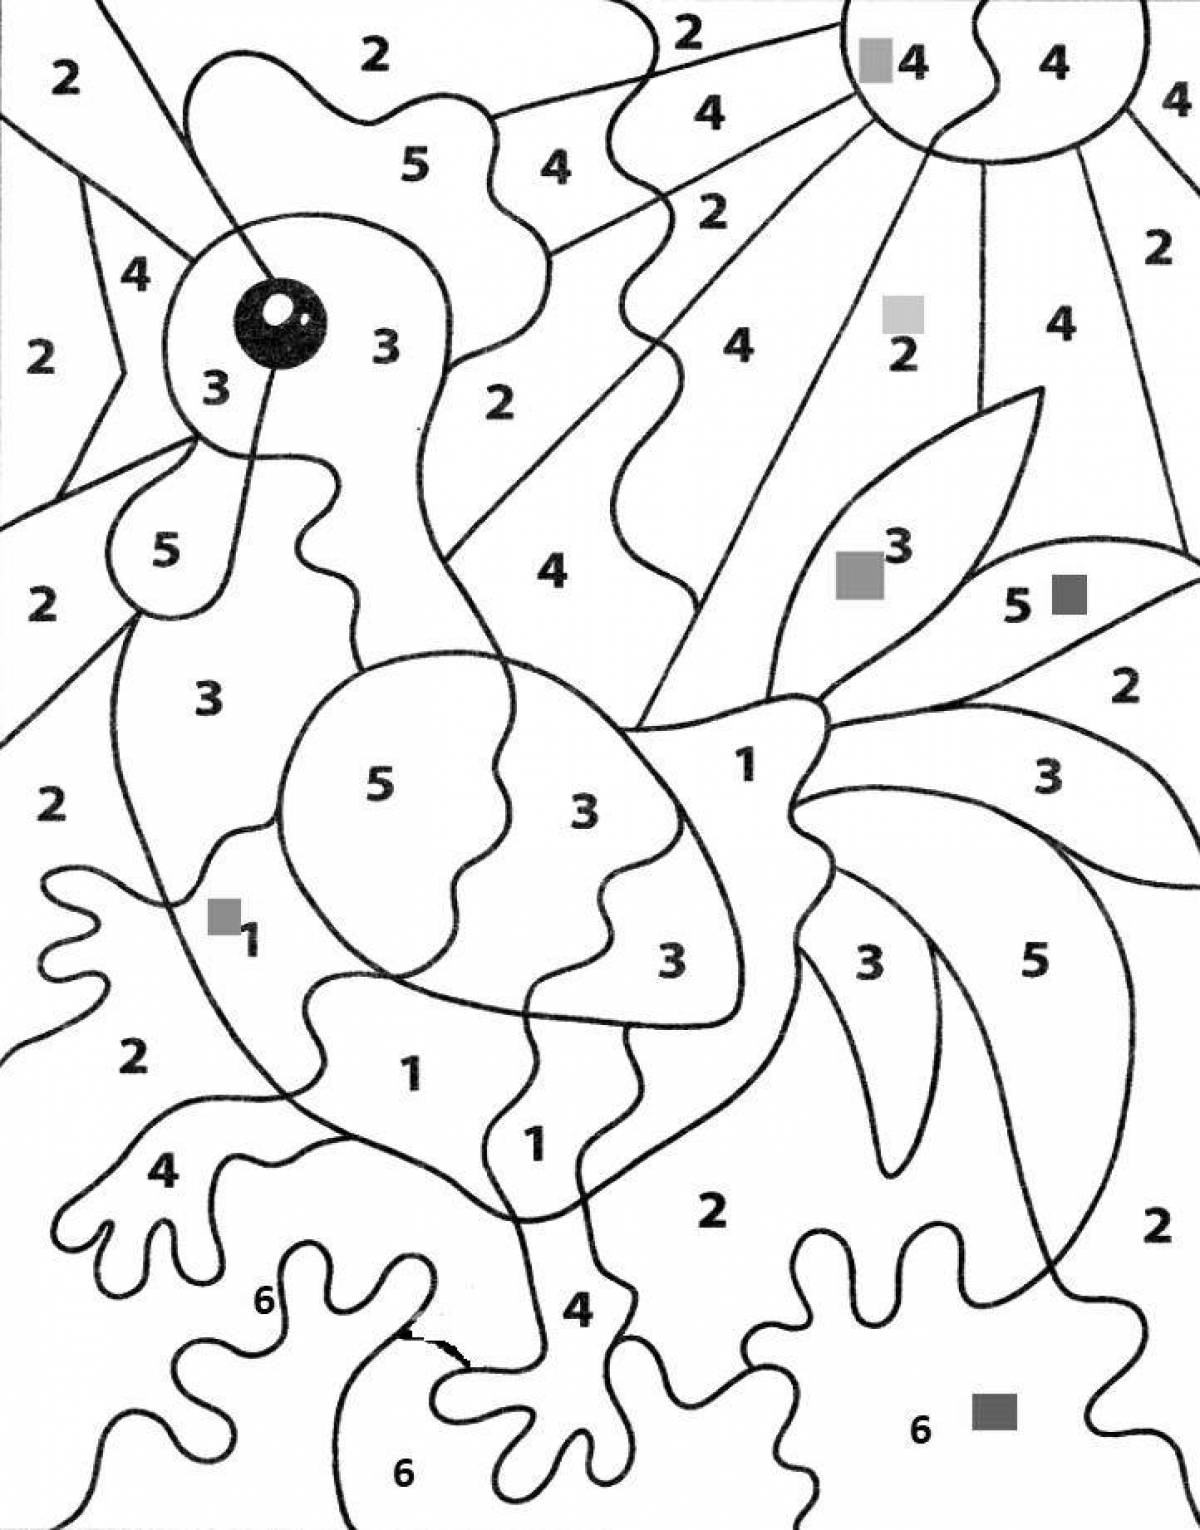 Colorful number coloring page for youth